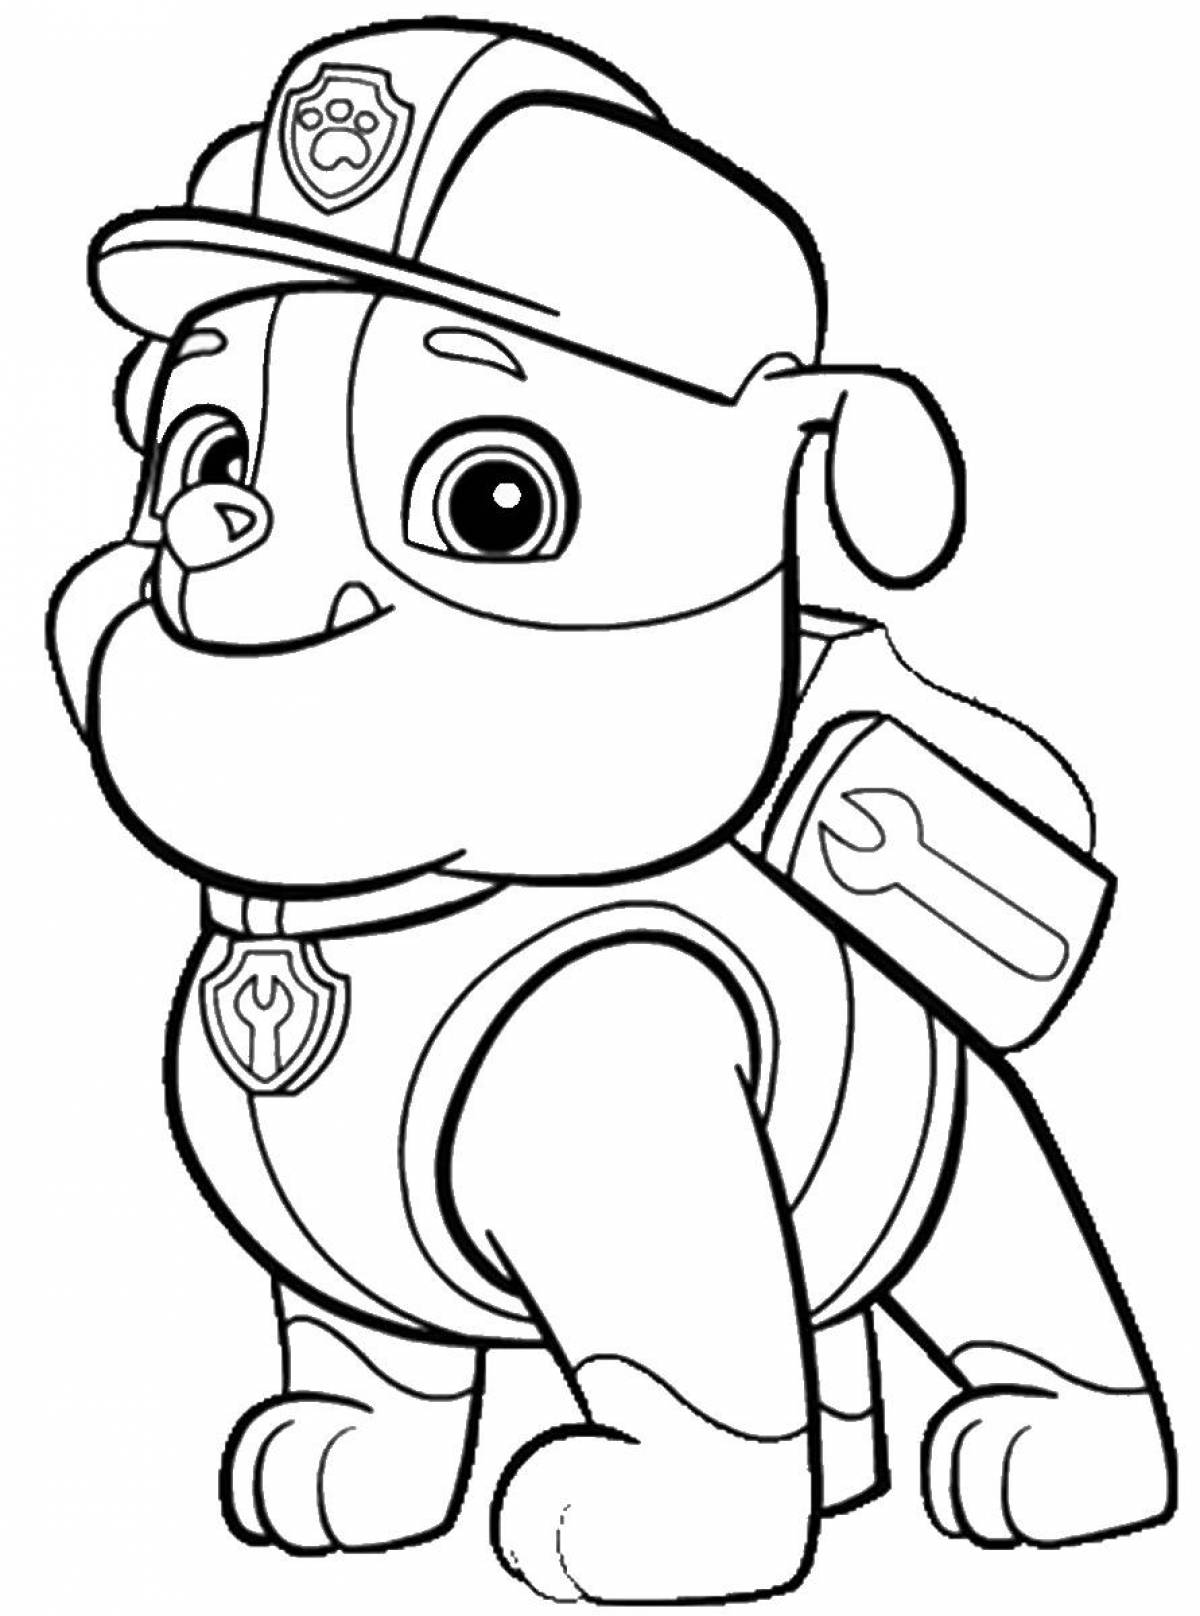 Rocky paw patrol live coloring